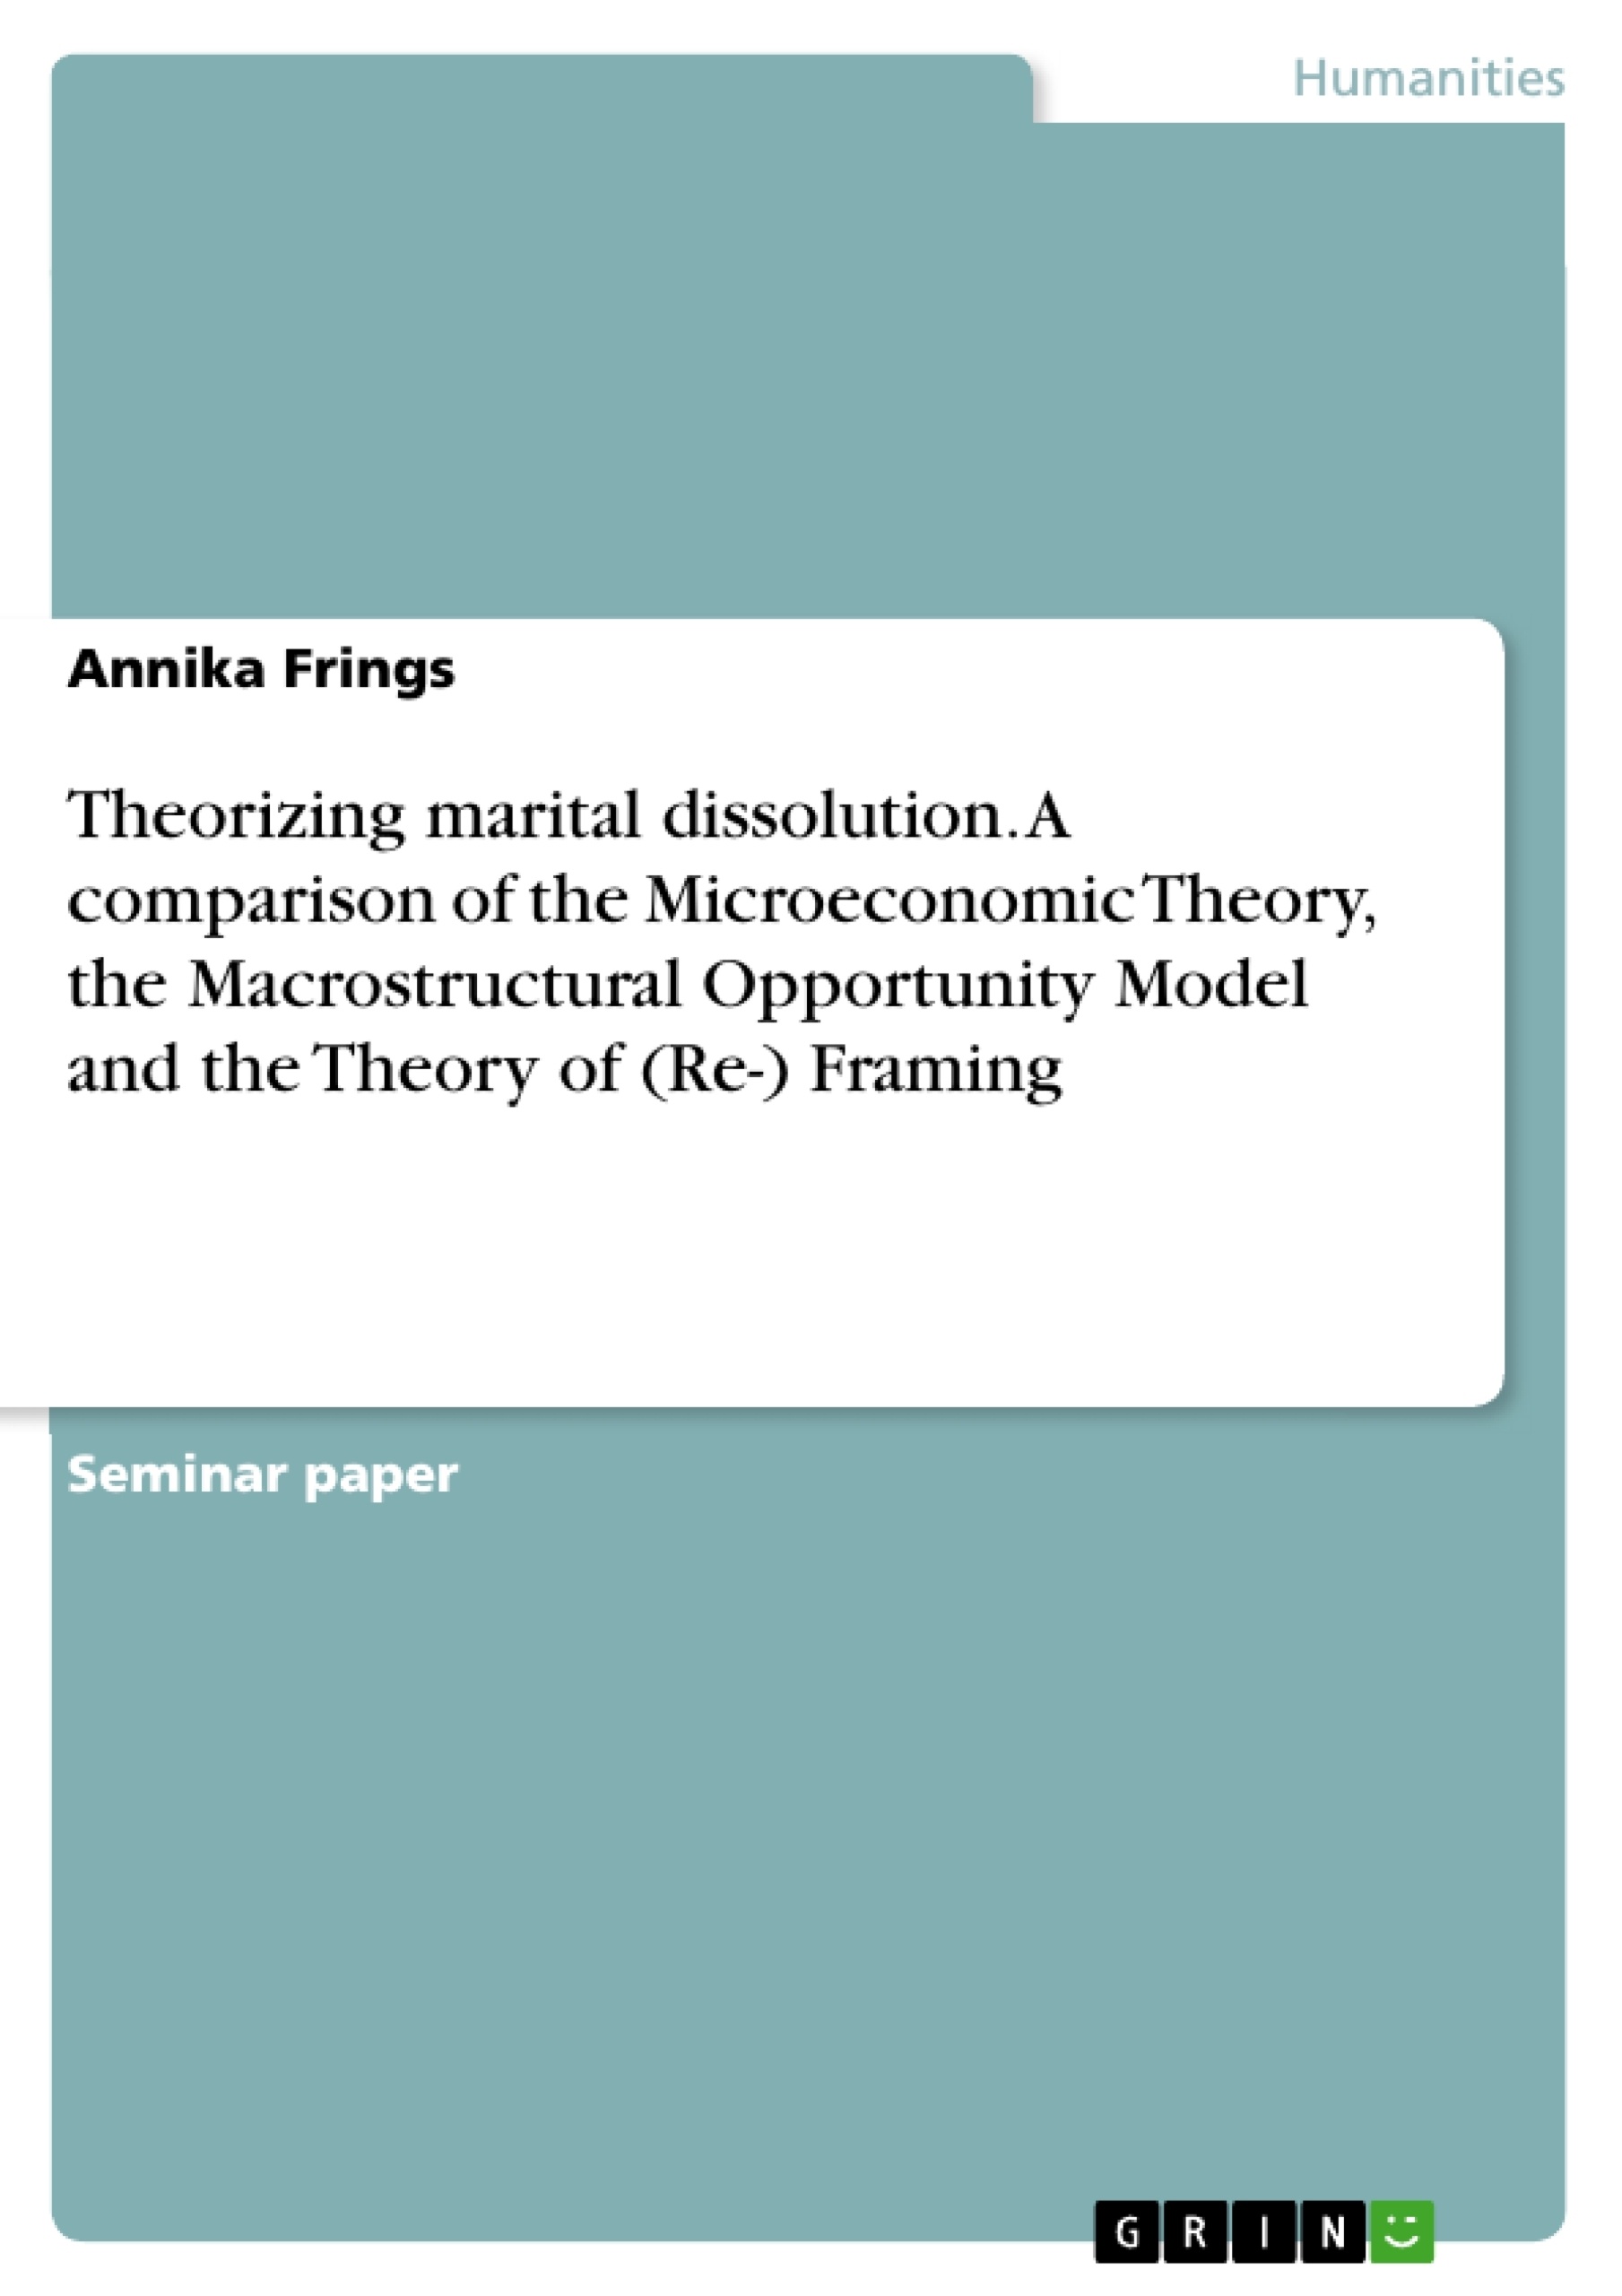 Titre: Theorizing marital dissolution. A comparison of the Microeconomic Theory, the Macrostructural Opportunity Model and the Theory of (Re-) Framing